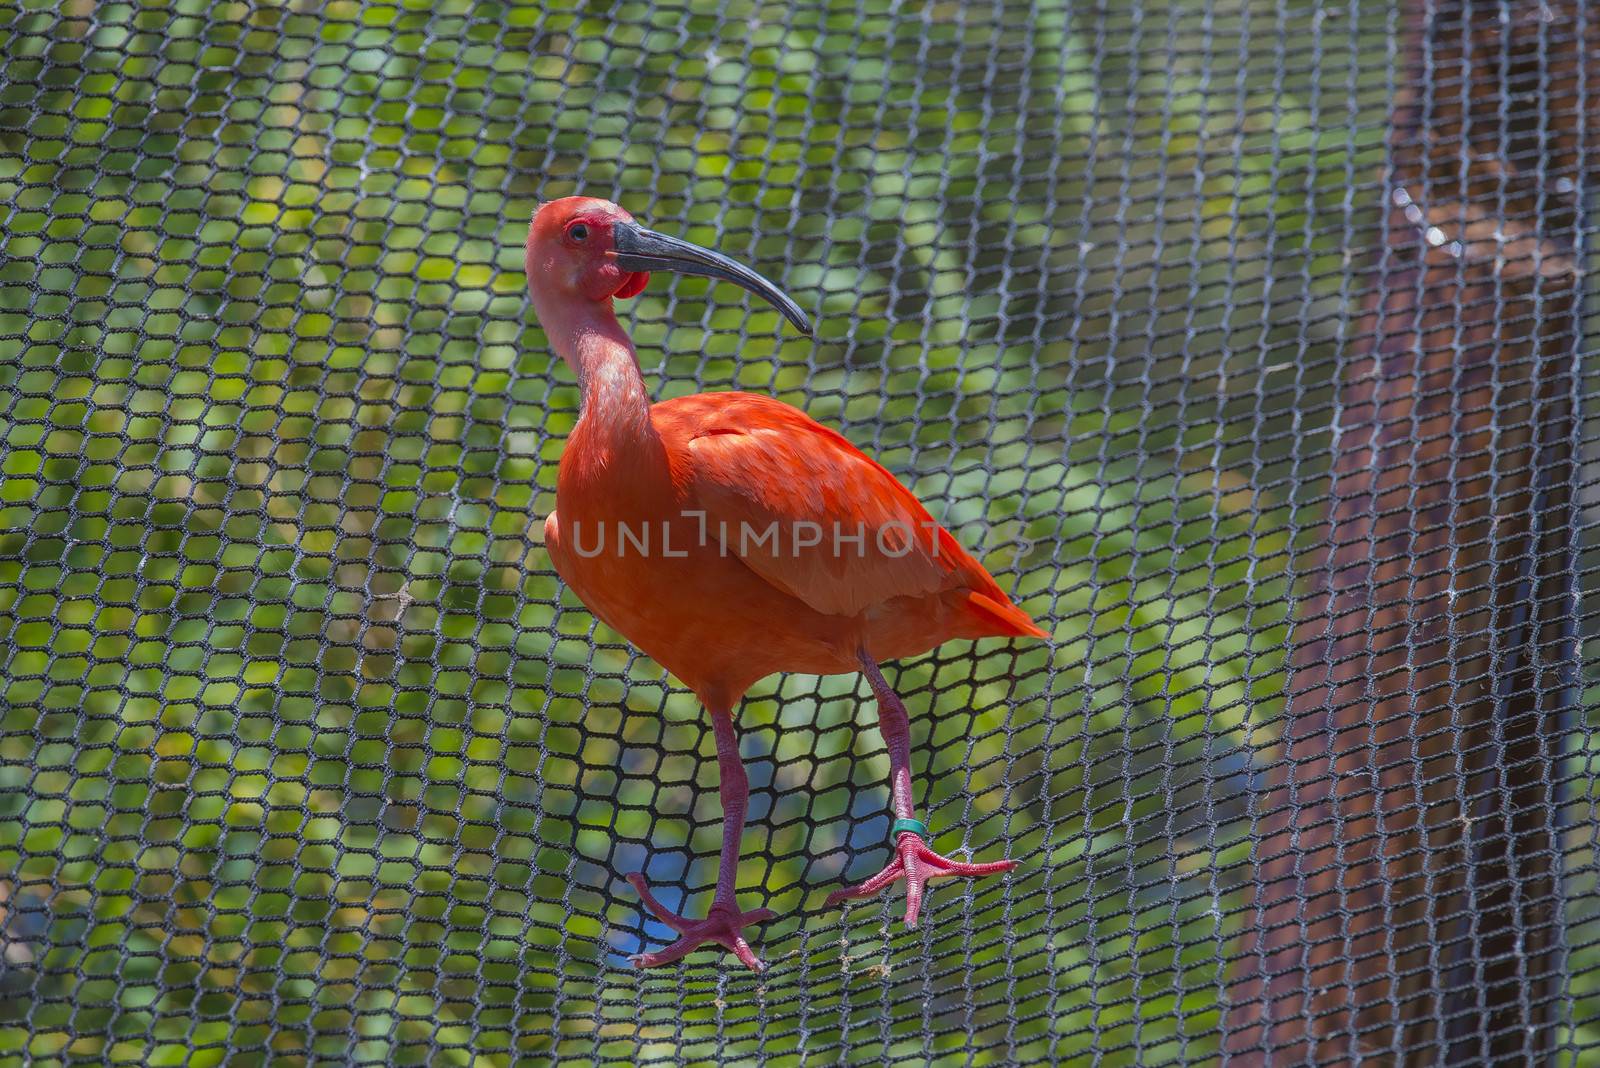 The Scarlet Ibis (Eudocimus ruber) is a species of ibis in the bird family Threskiornithidae. It inhabits in tropical South America and islands of the Caribbean. Photo is shot 25/07/2013.